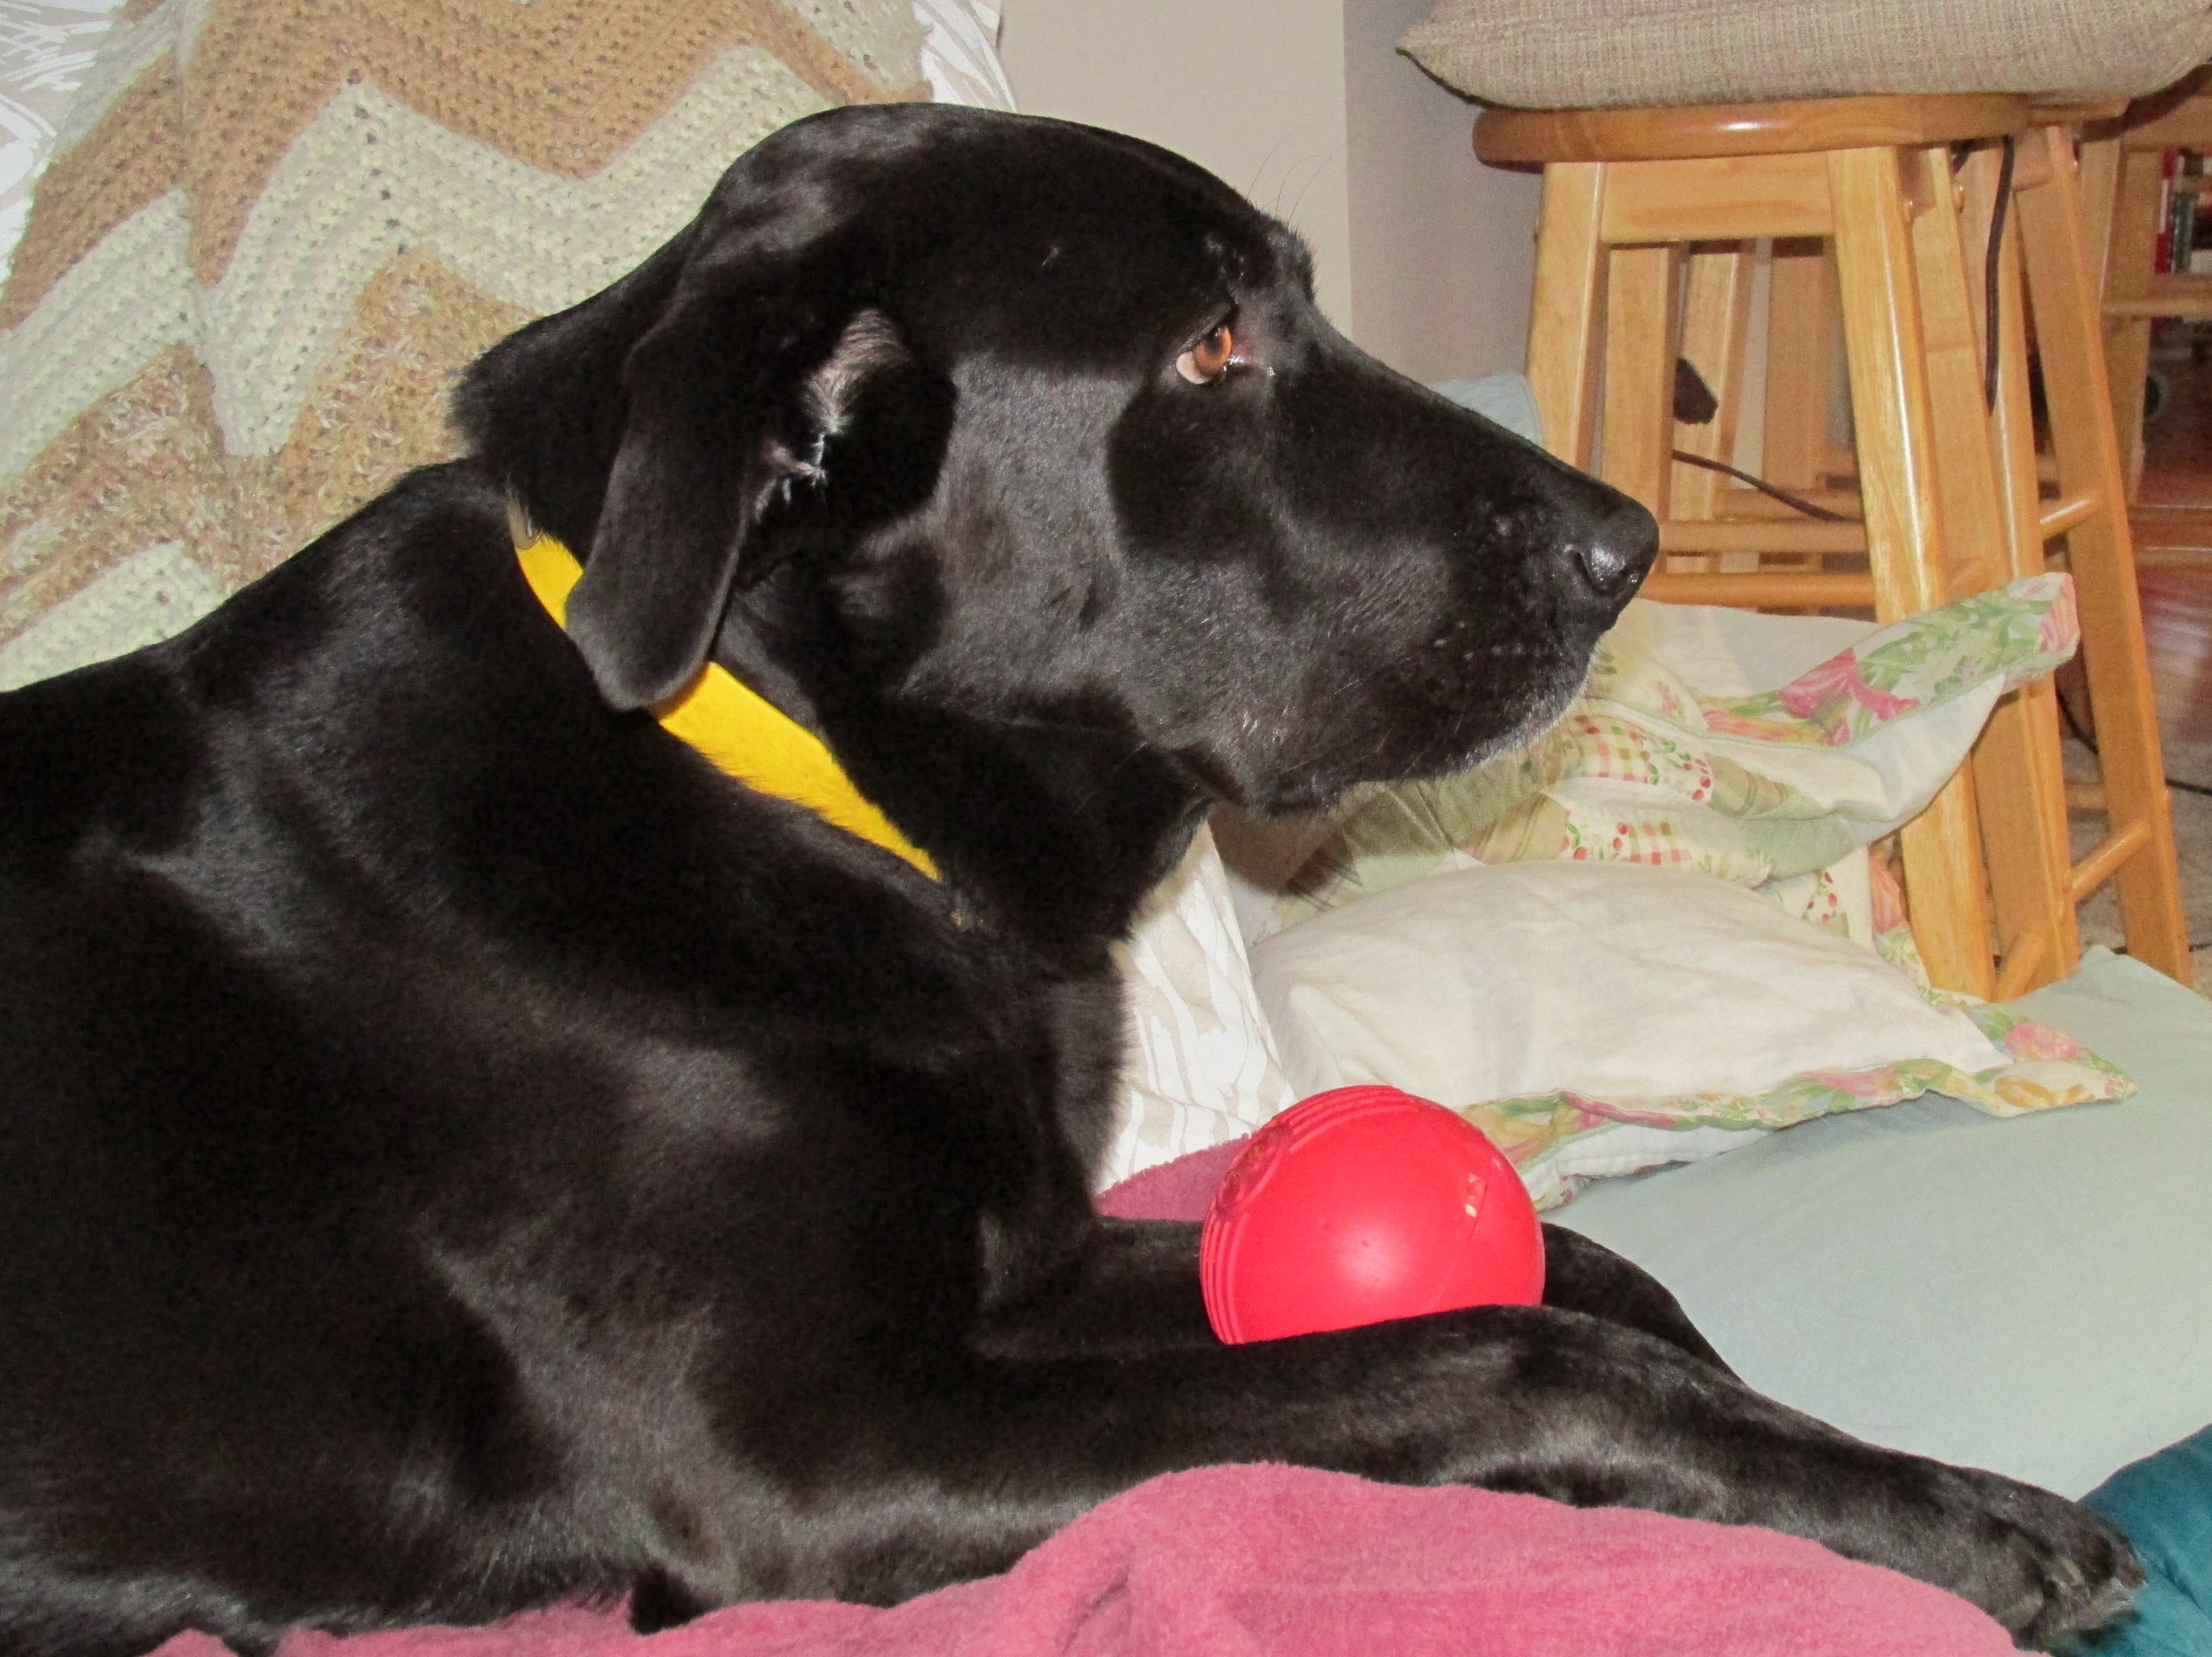 Baloo with his squeaky ball.